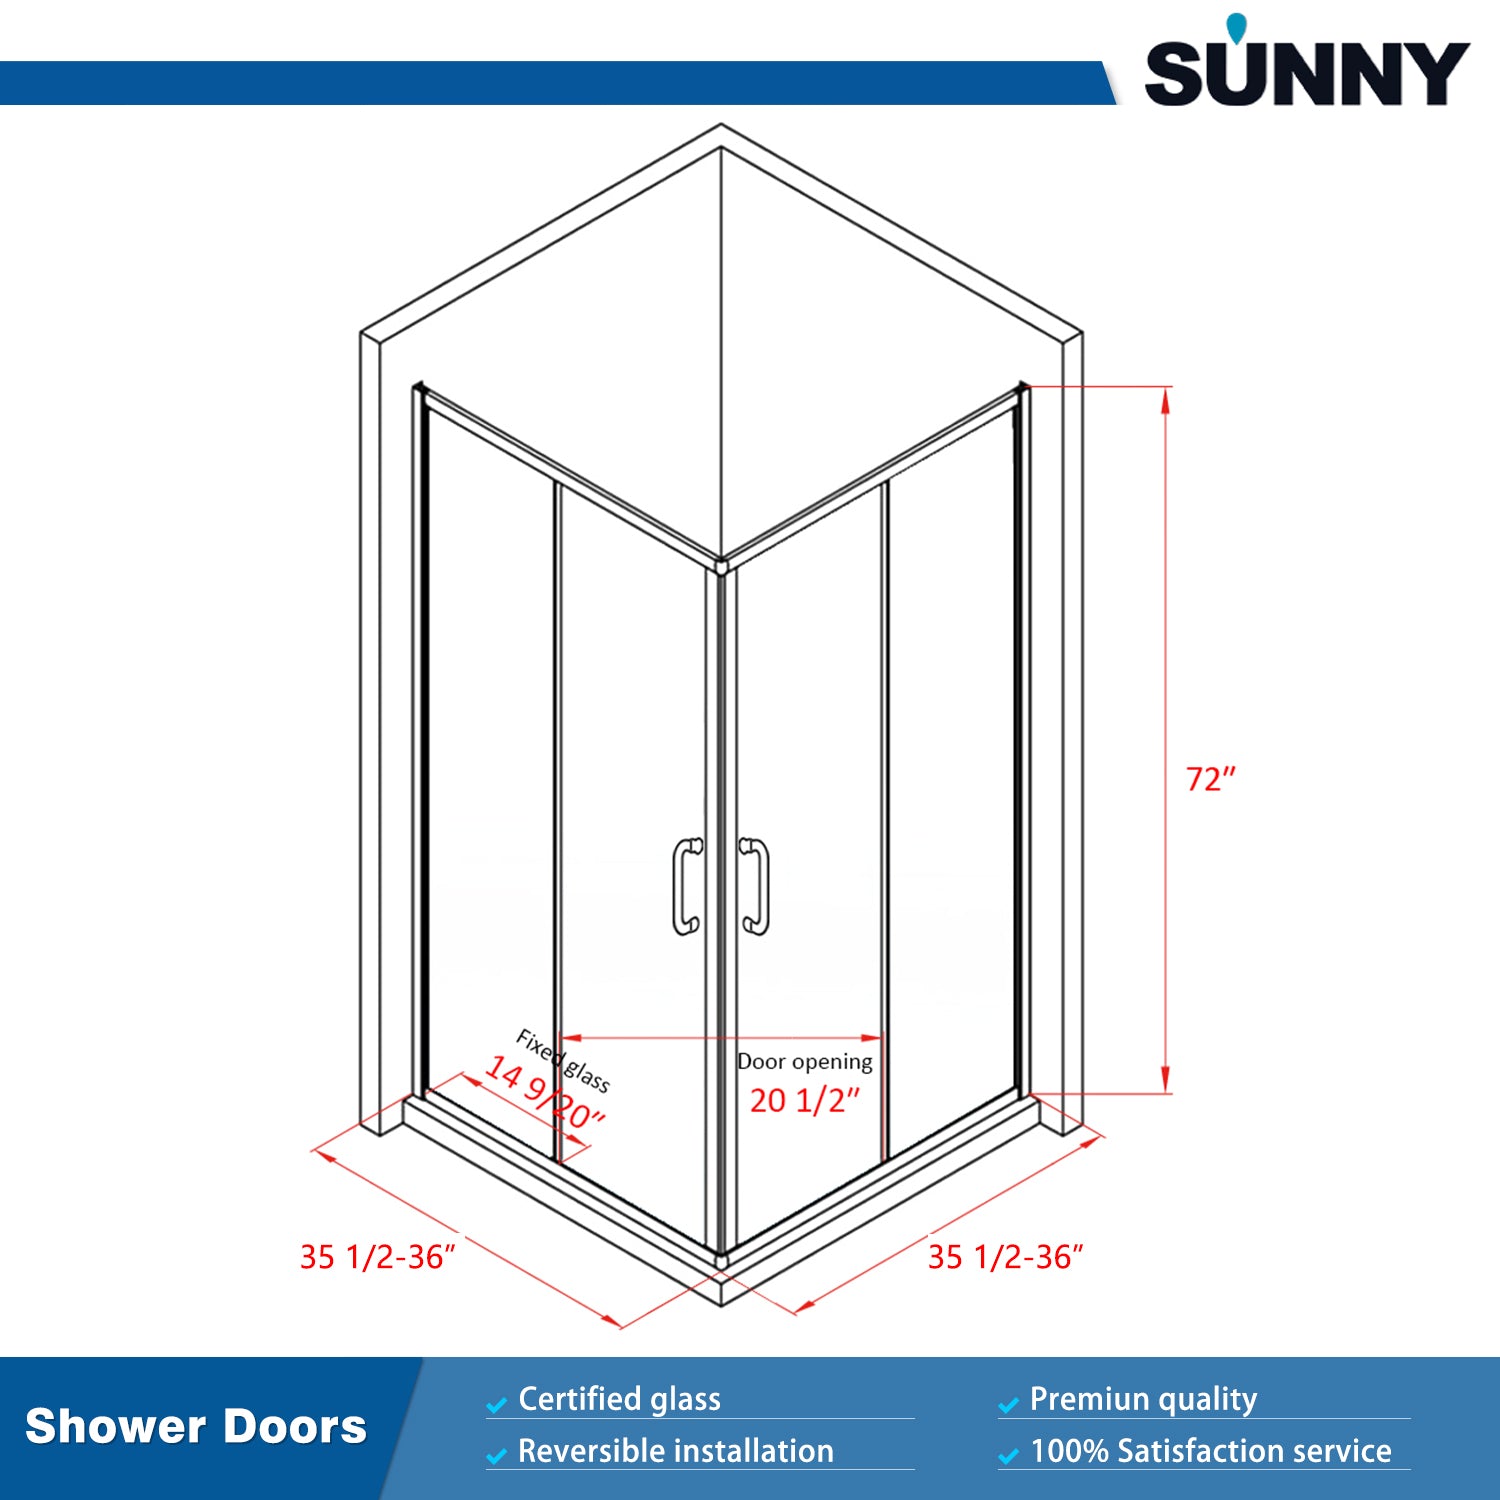 SUNNY SHOWER 36 in. W X 36 in. W X 72 in. H Chrome Finish Corner Entry Enclosure With Sliding Doors Size Chart